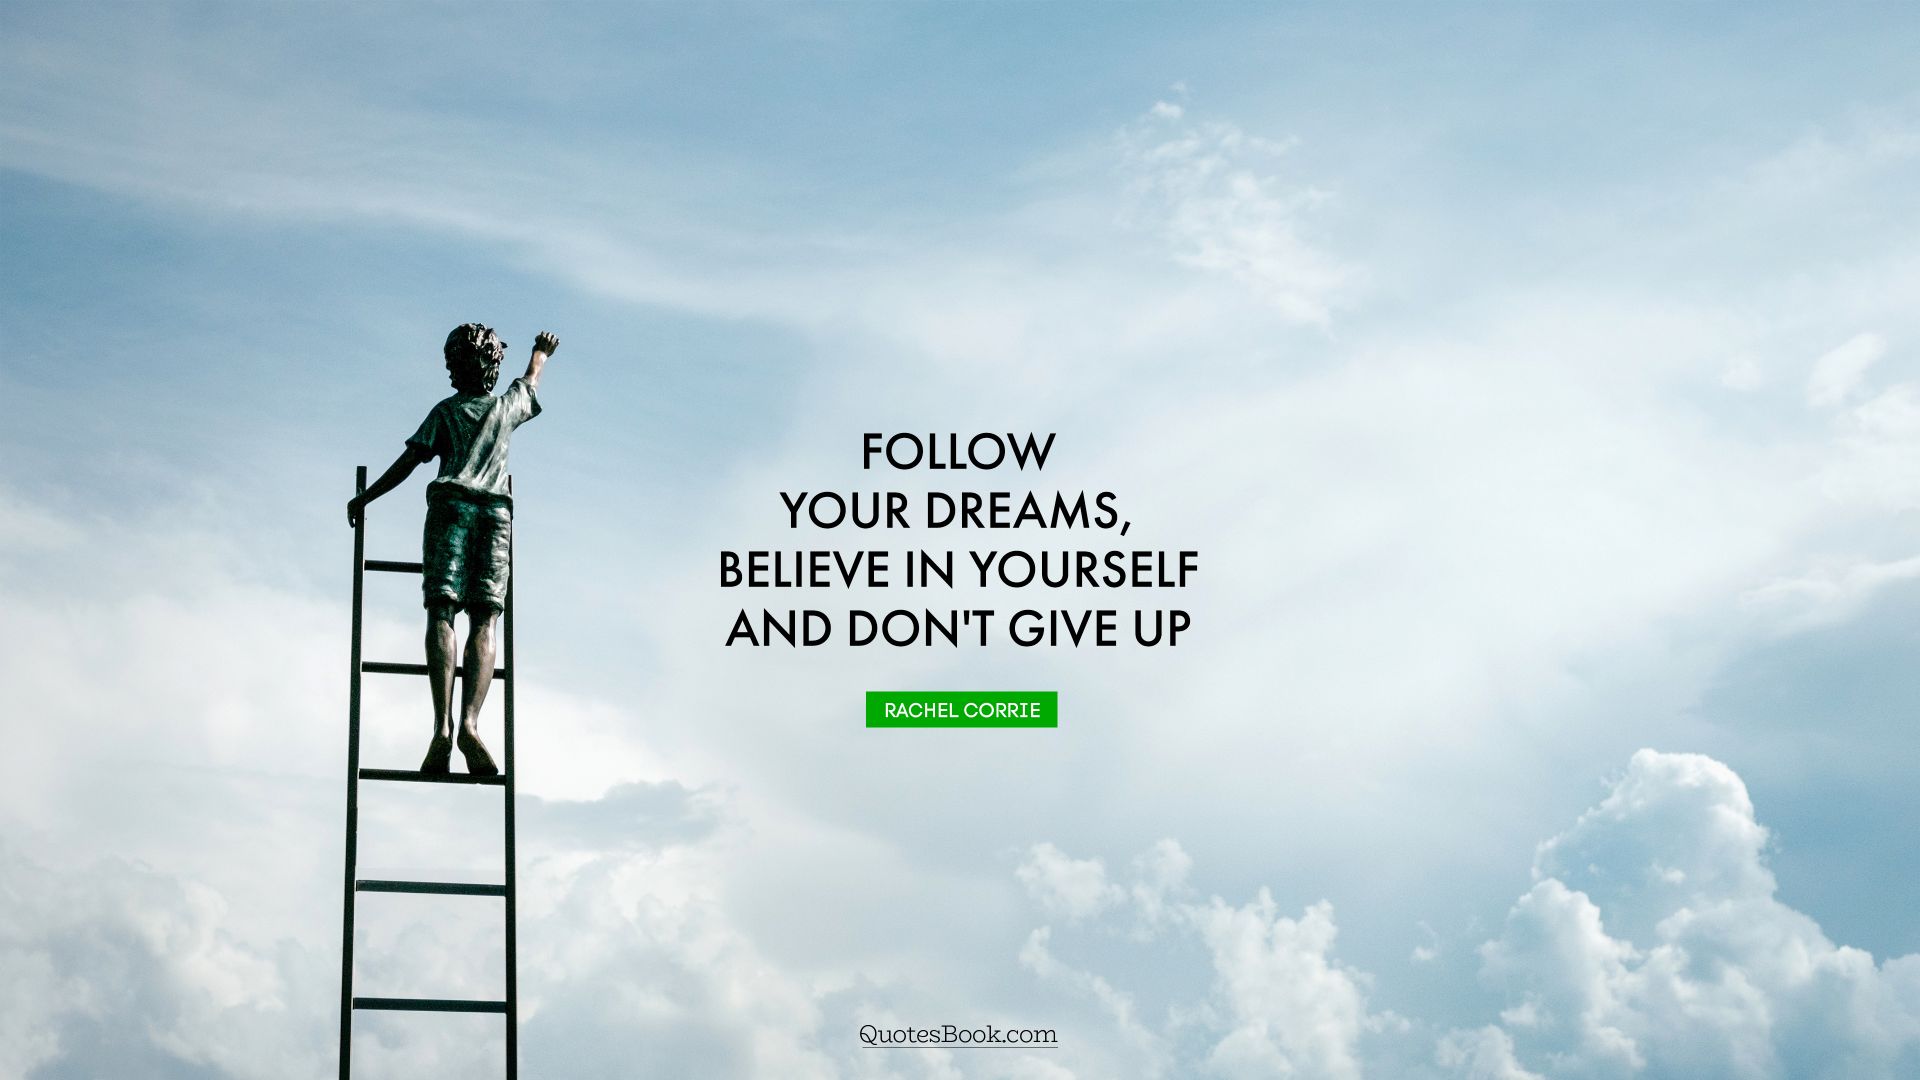 Follow your dreams, believe in yourself and don't give up. - Quote by Rachel Corrie